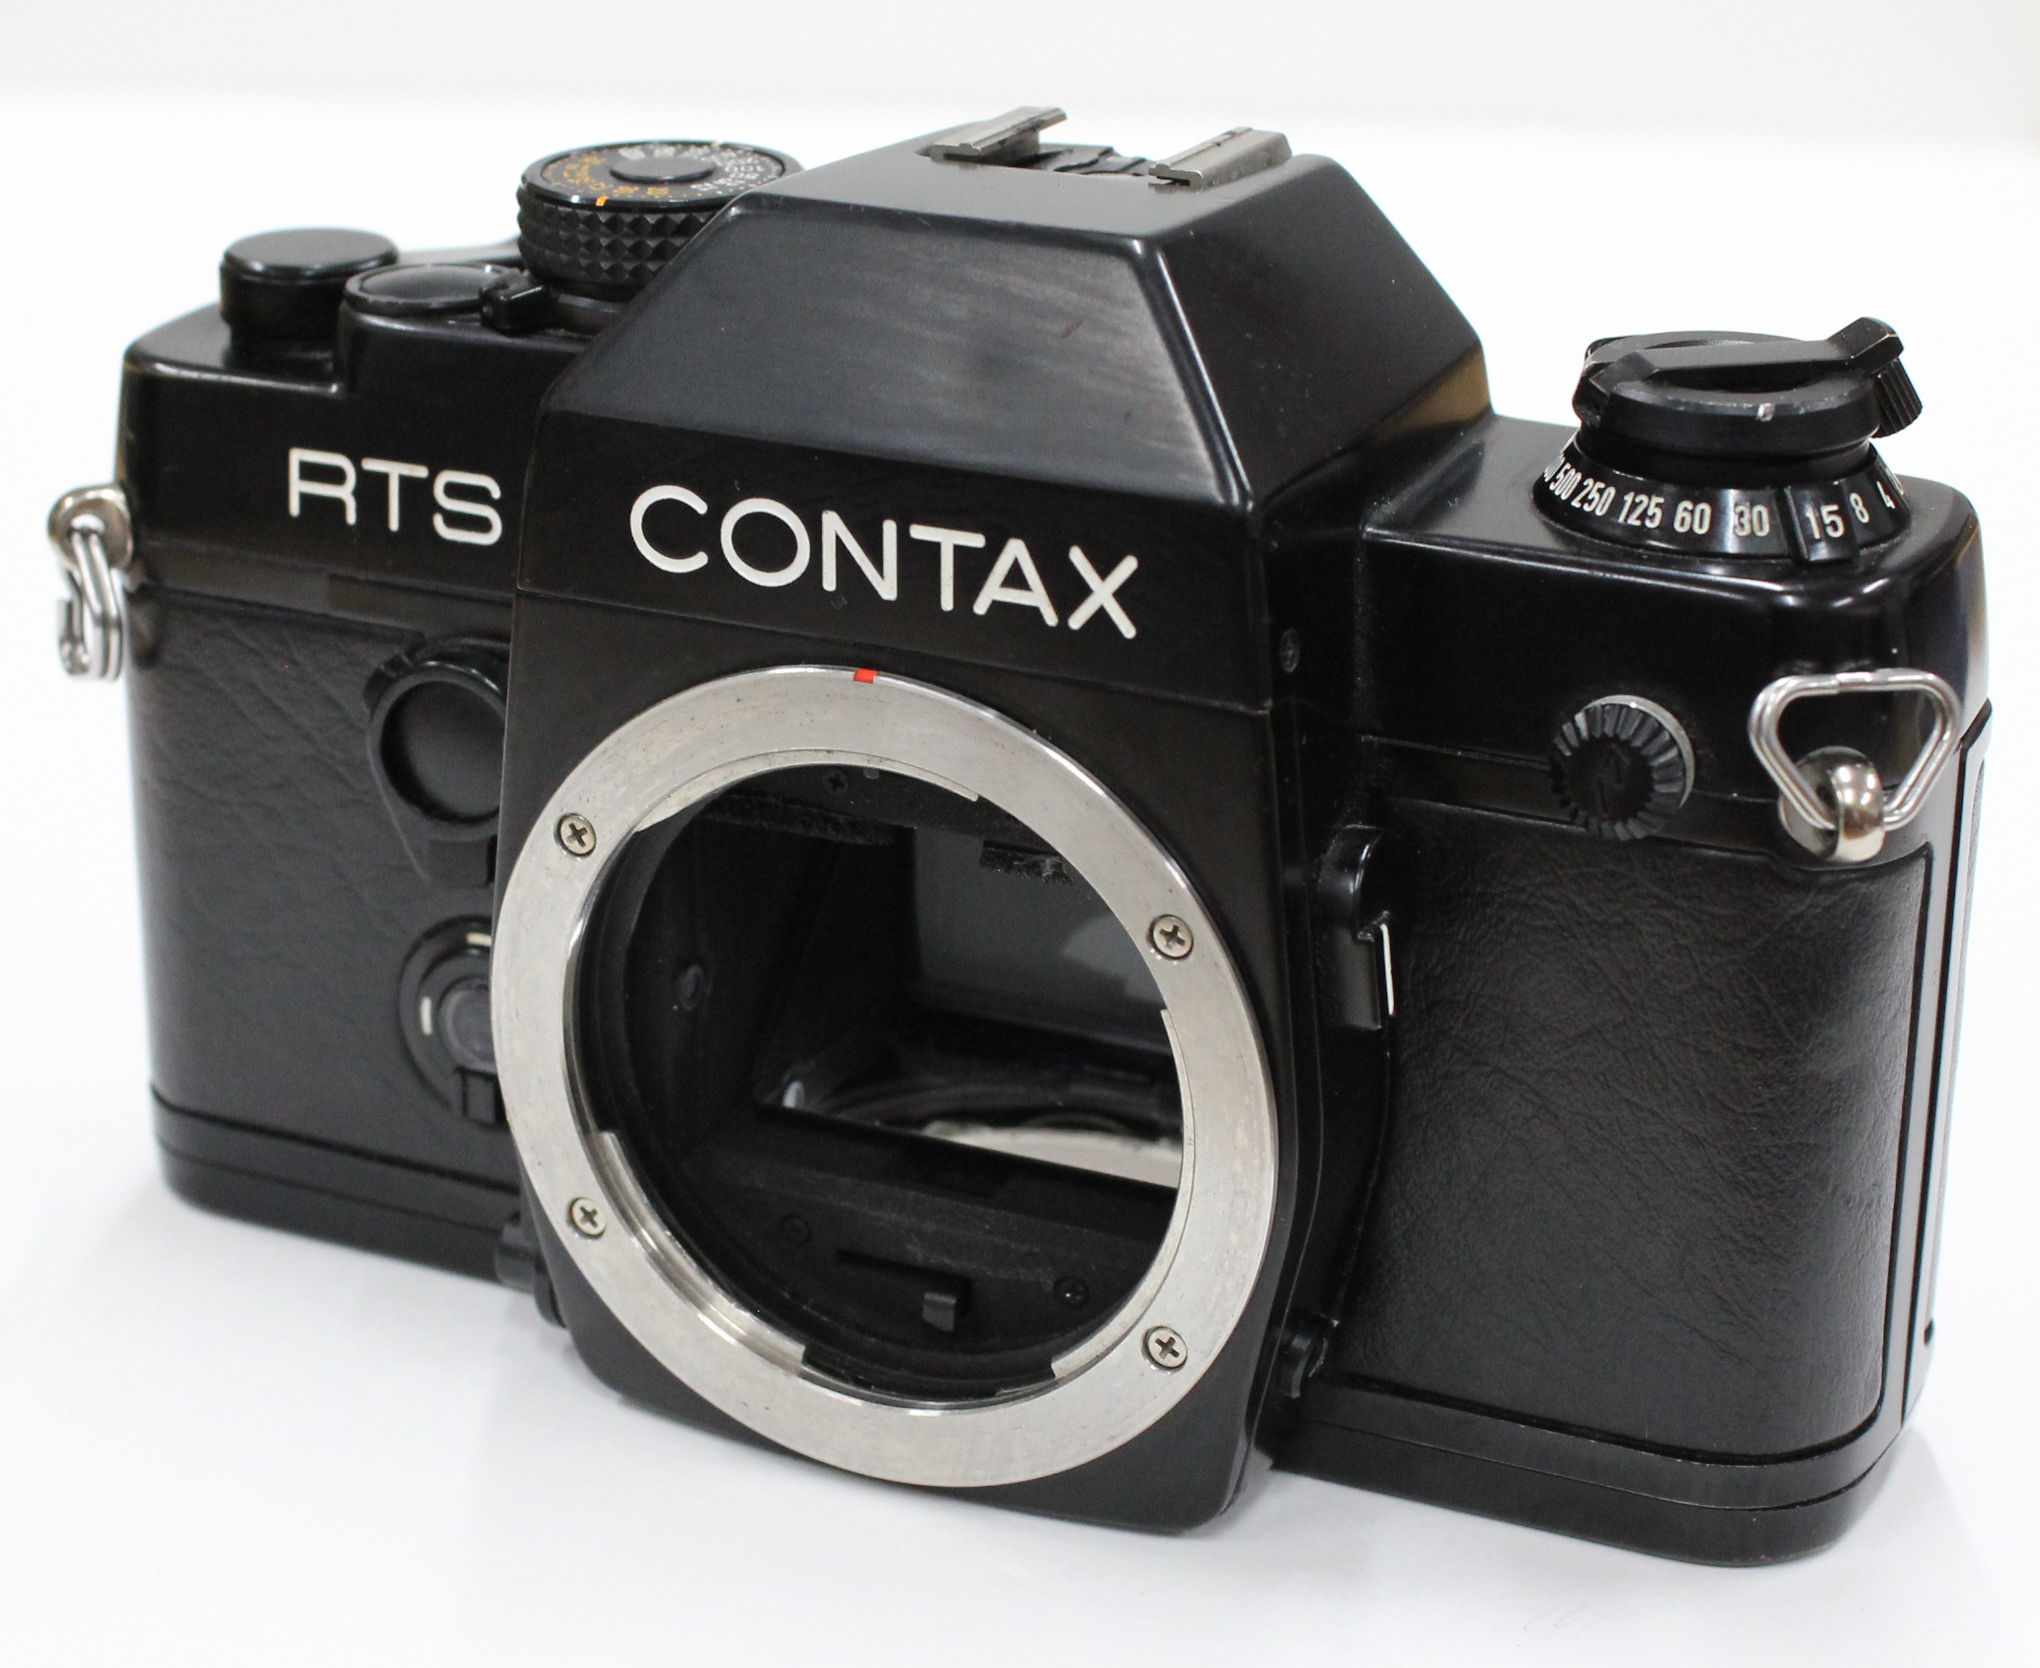 Japan Used Camera Shop | [Excellent +++] Contax RTS II Quartz 35mm SLR Film Camera Body from Japan